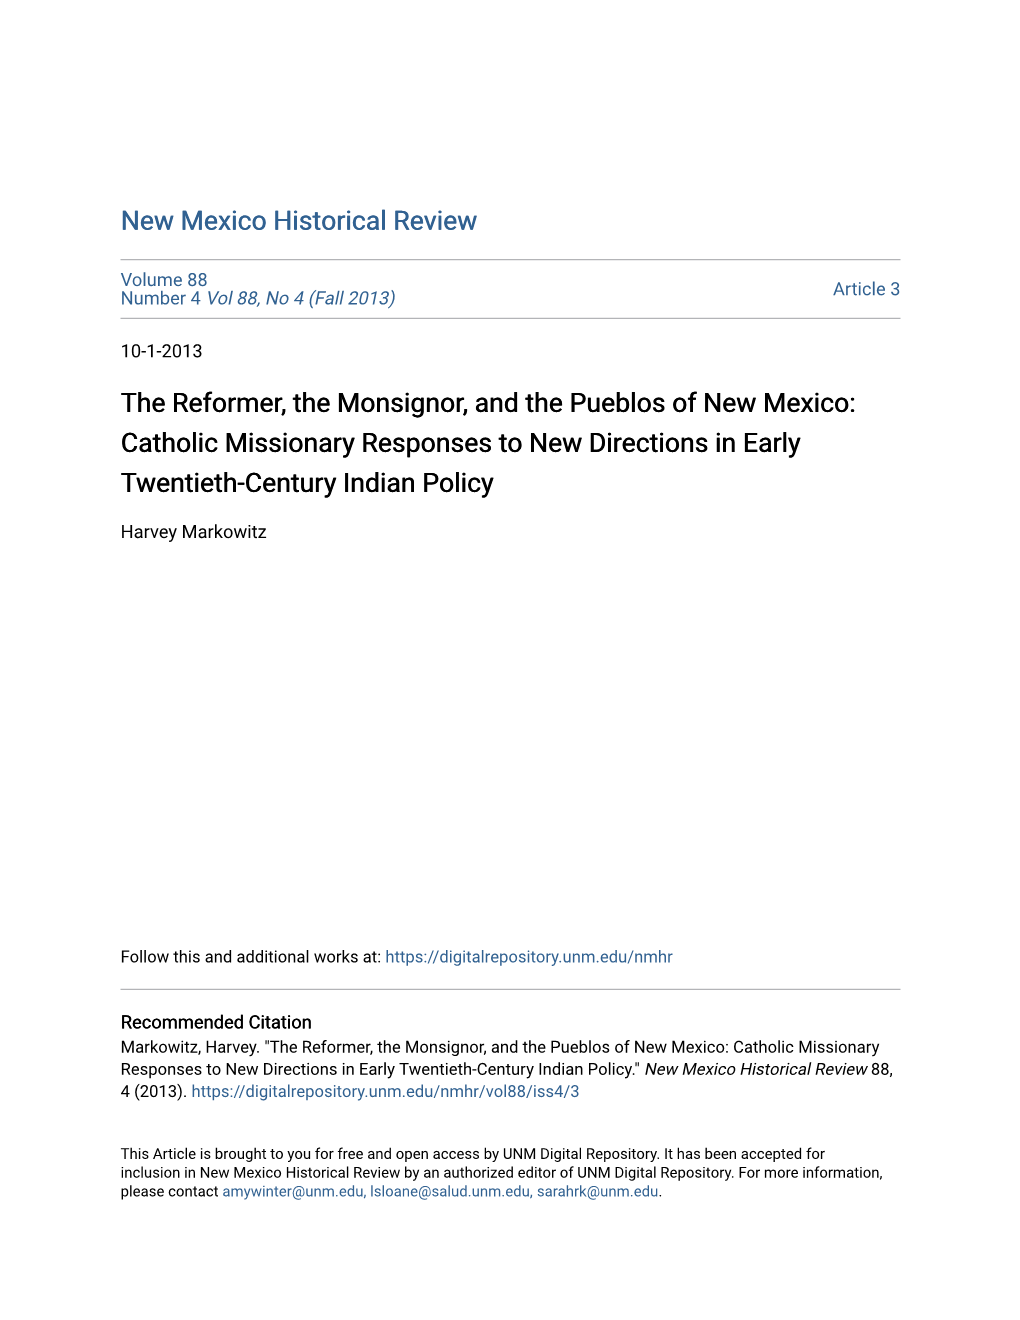 The Reformer, the Monsignor, and the Pueblos of New Mexico: Catholic Missionary Responses to New Directions in Early Twentieth-Century Indian Policy